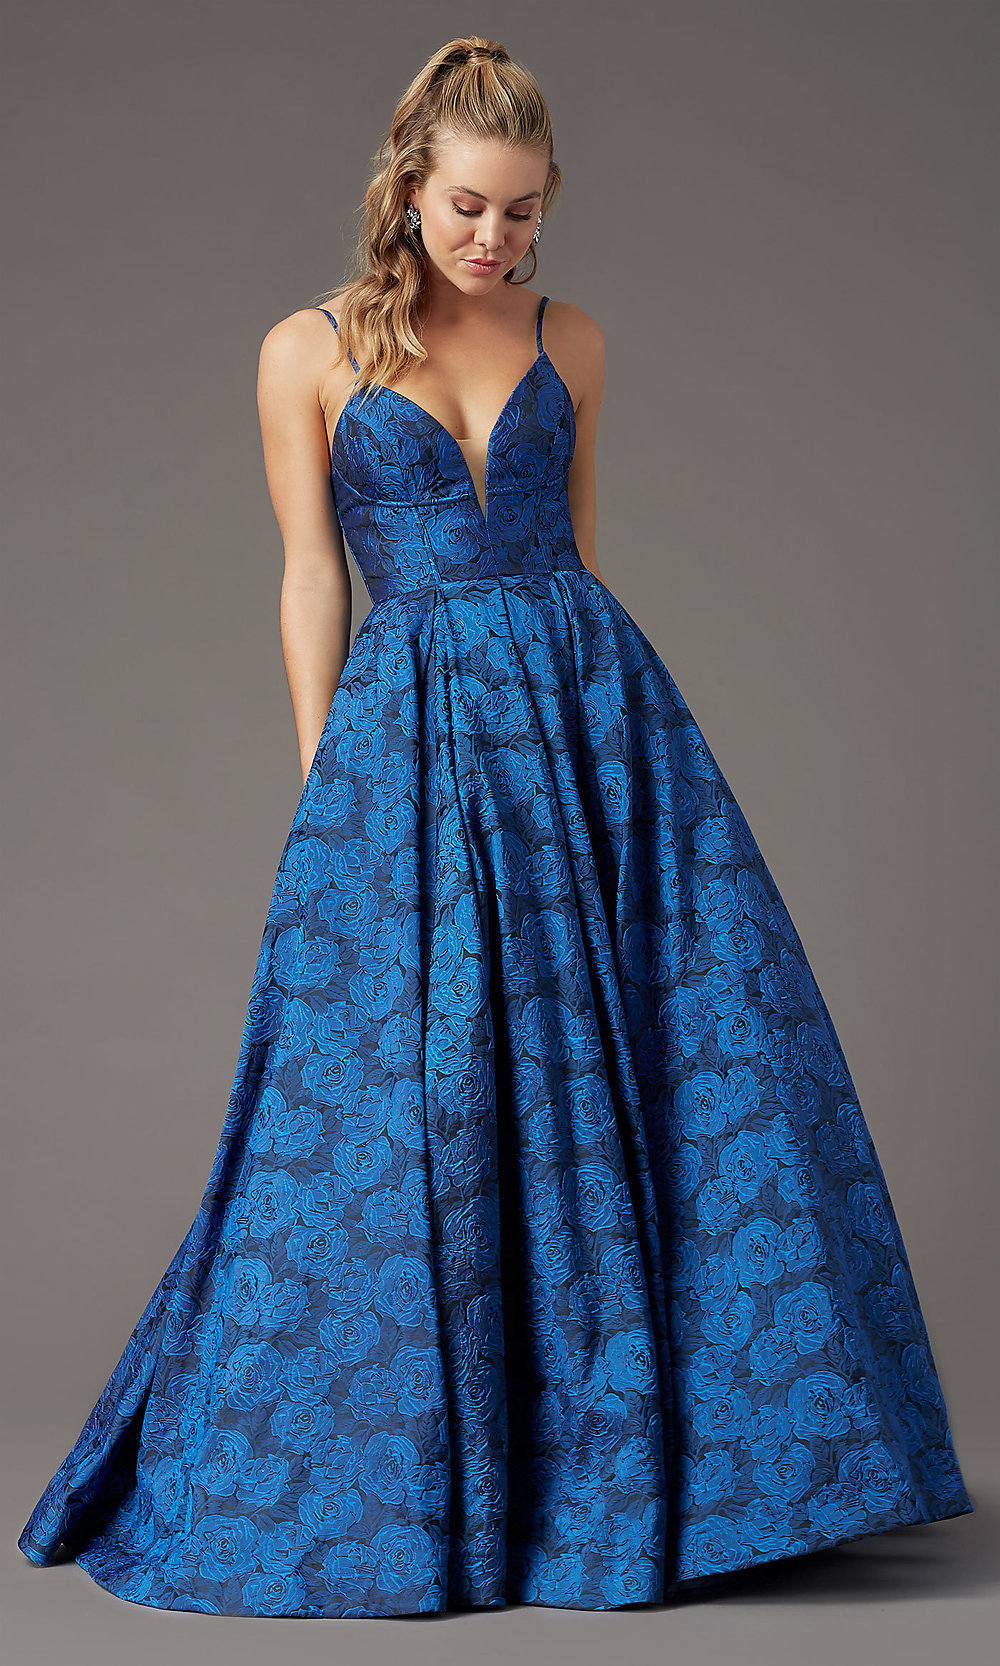 Long Floral-Print Brocade Prom Dress by PromGirl